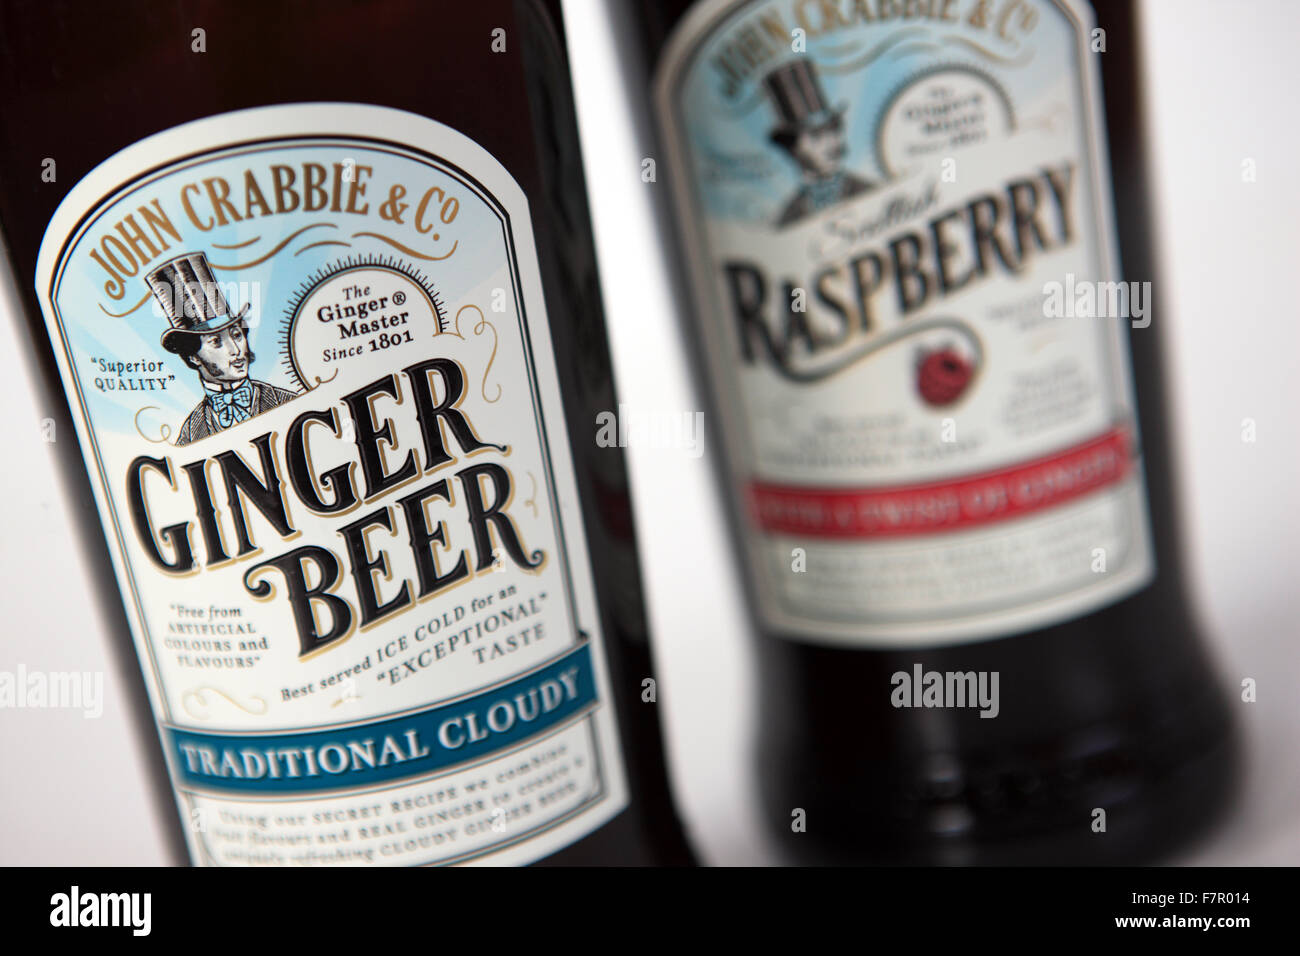 Bottles of Crabbie's Ginger Beer and raspberry flavoured ginger beer Stock Photo